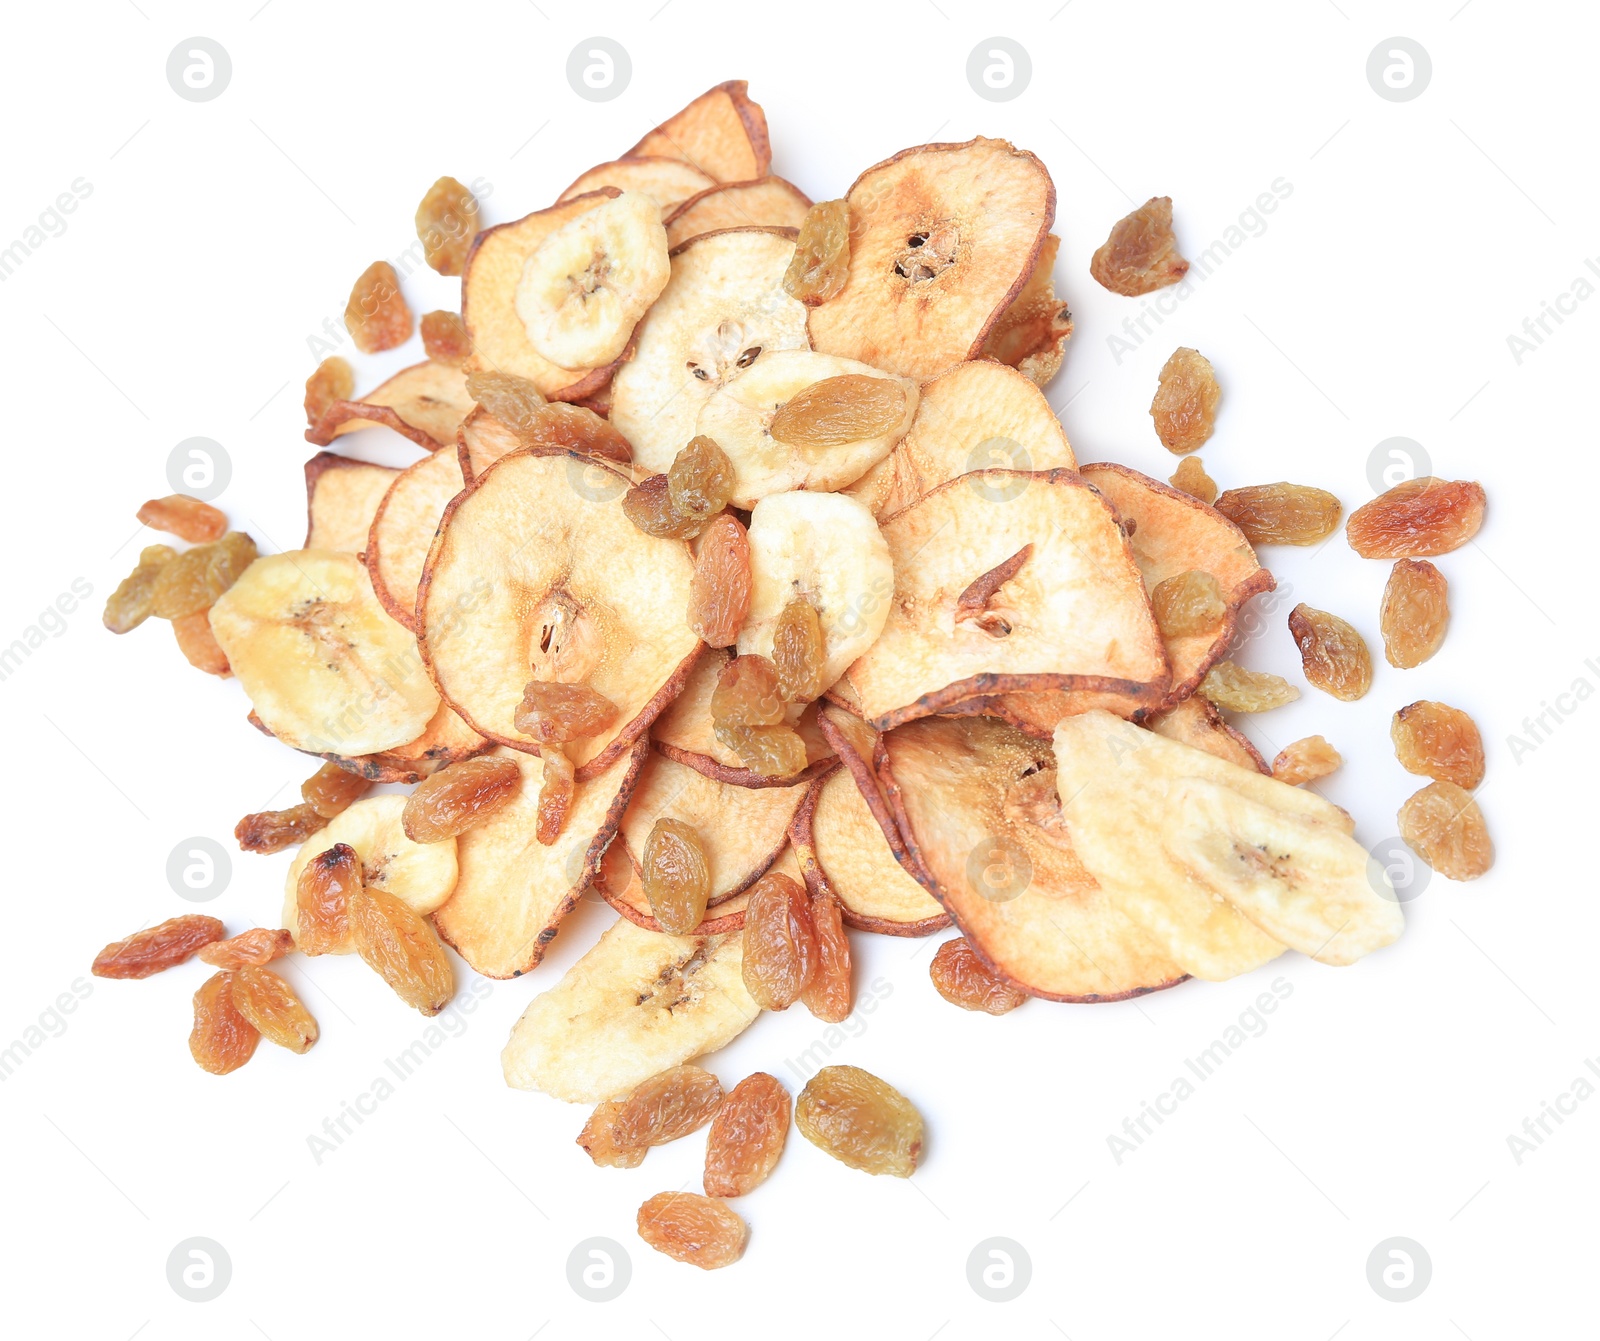 Photo of Tasty dried apples and raisins on white background, top view